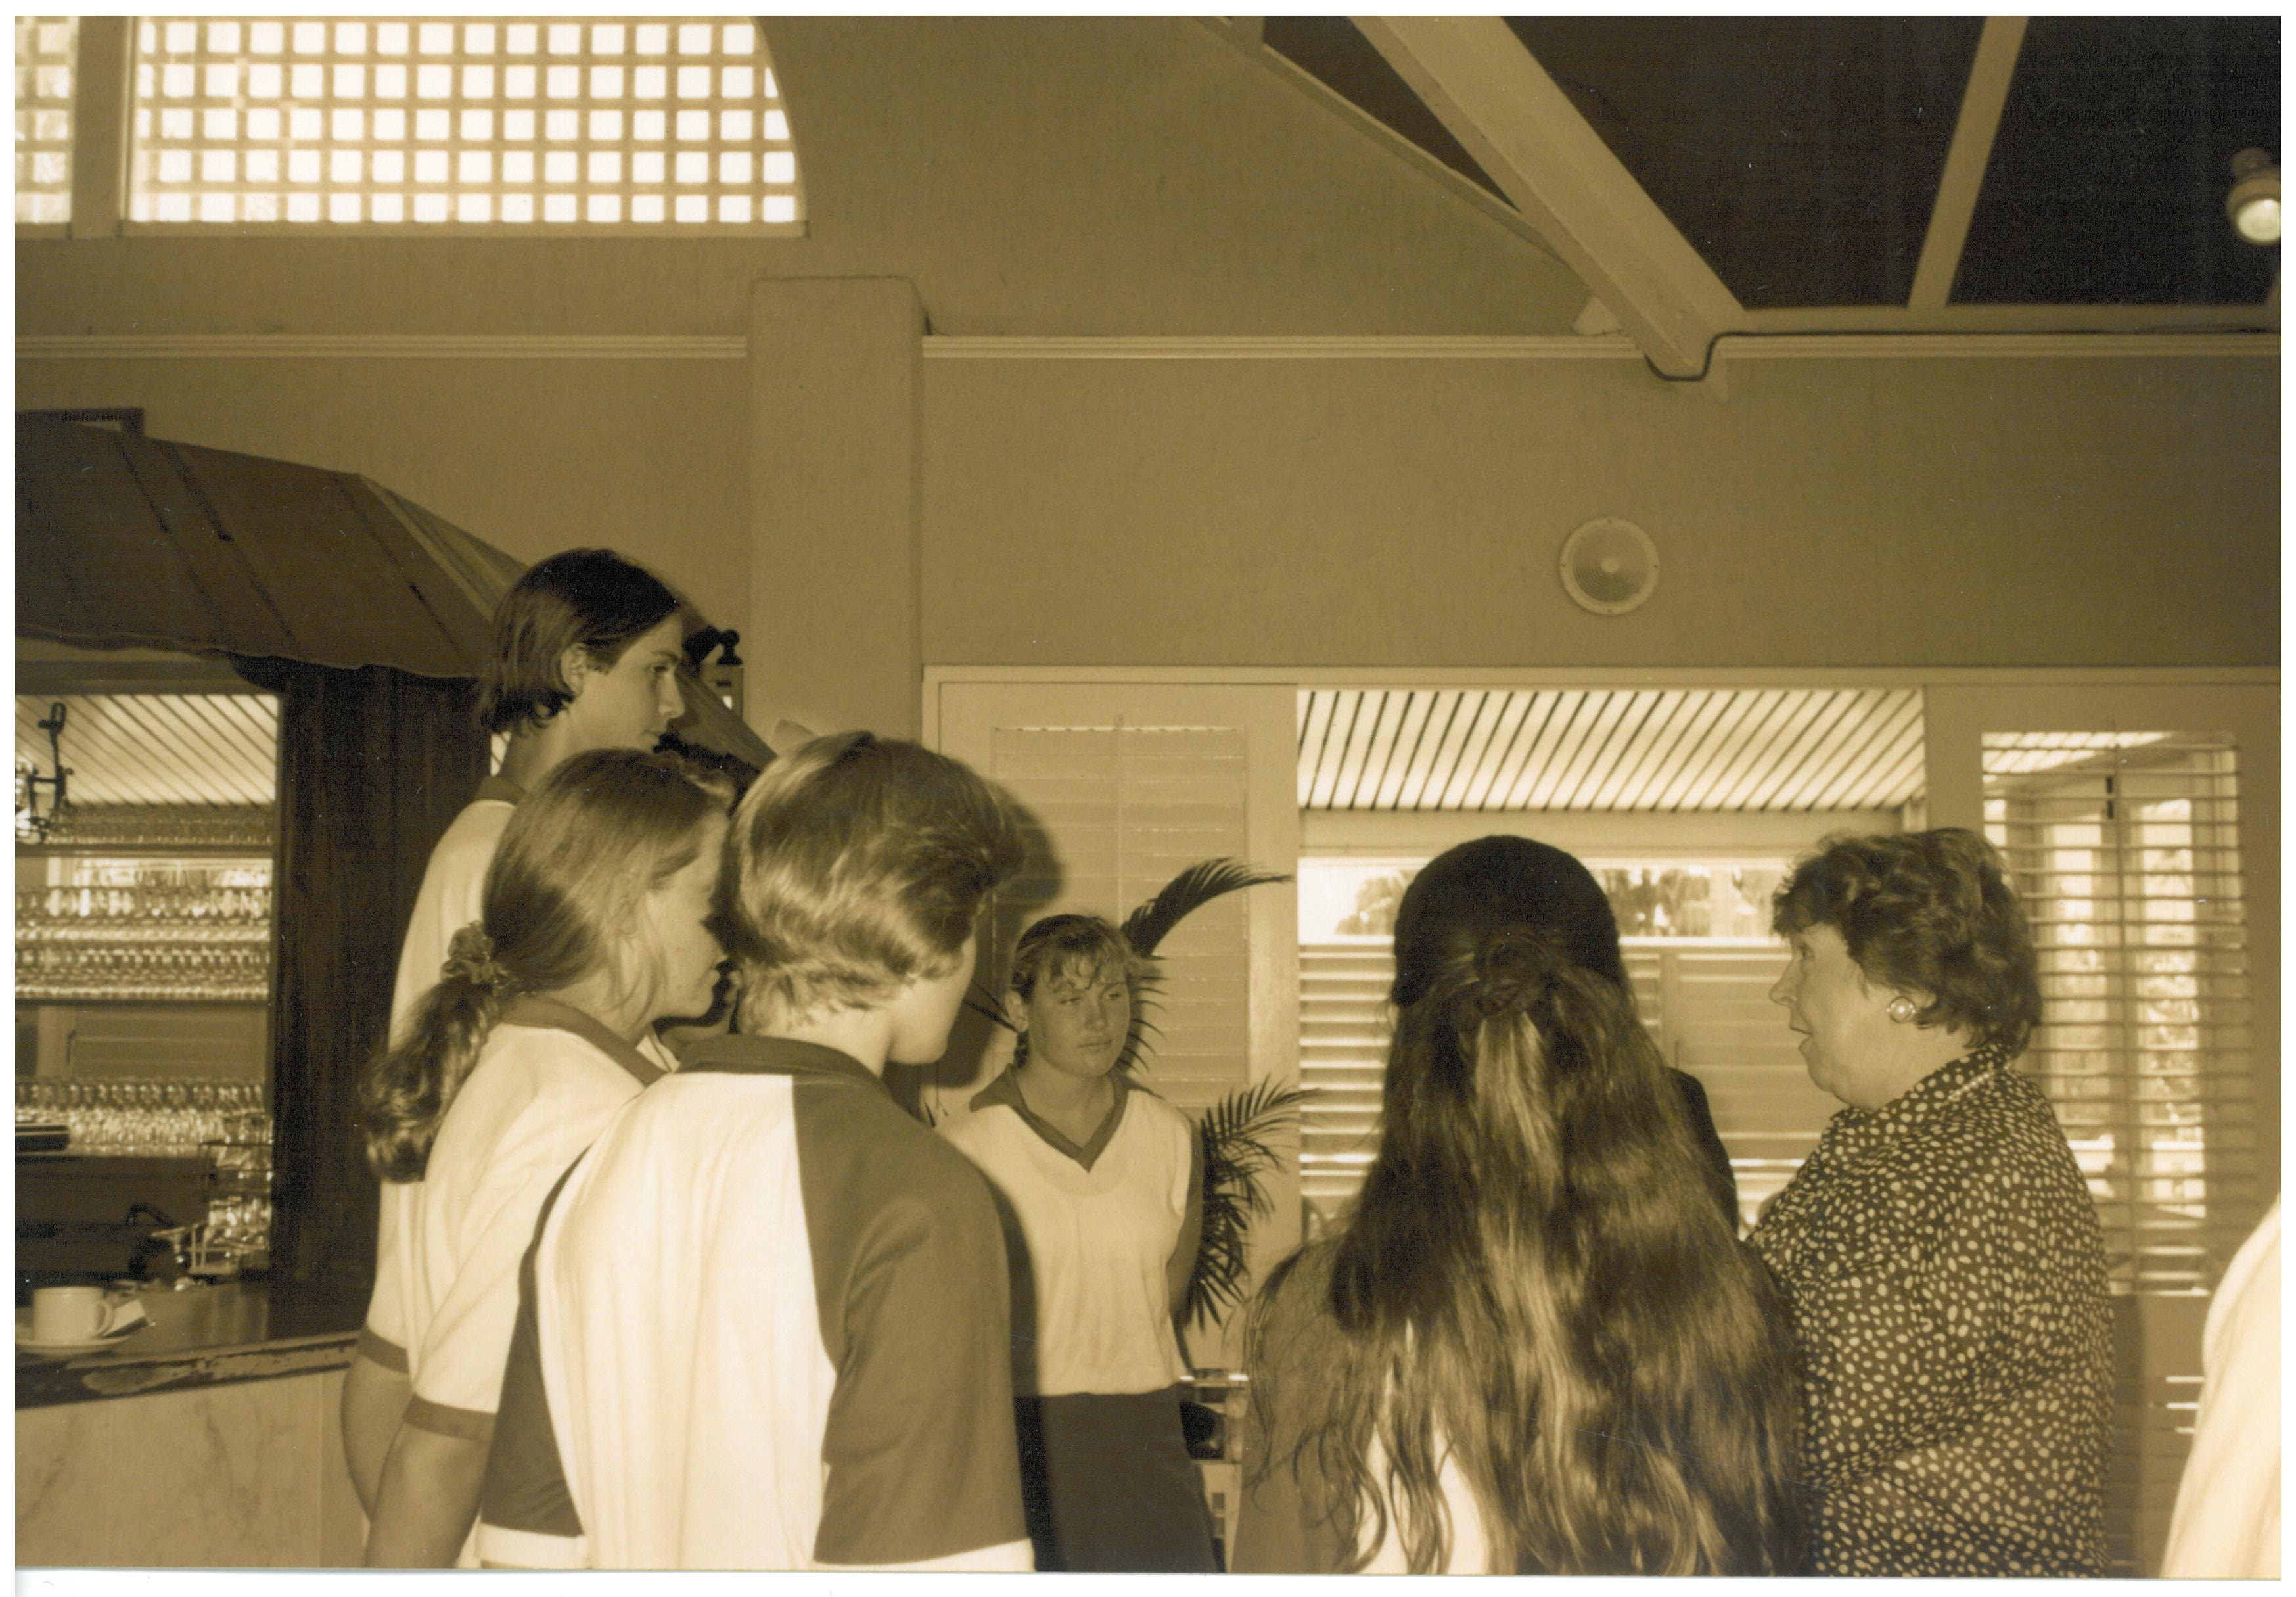 Committee member Senator Kay Denman (right) speaking to local school students from Woree High School and Cairns High School in attendance at the Cairns hearing, 22 February 1995.